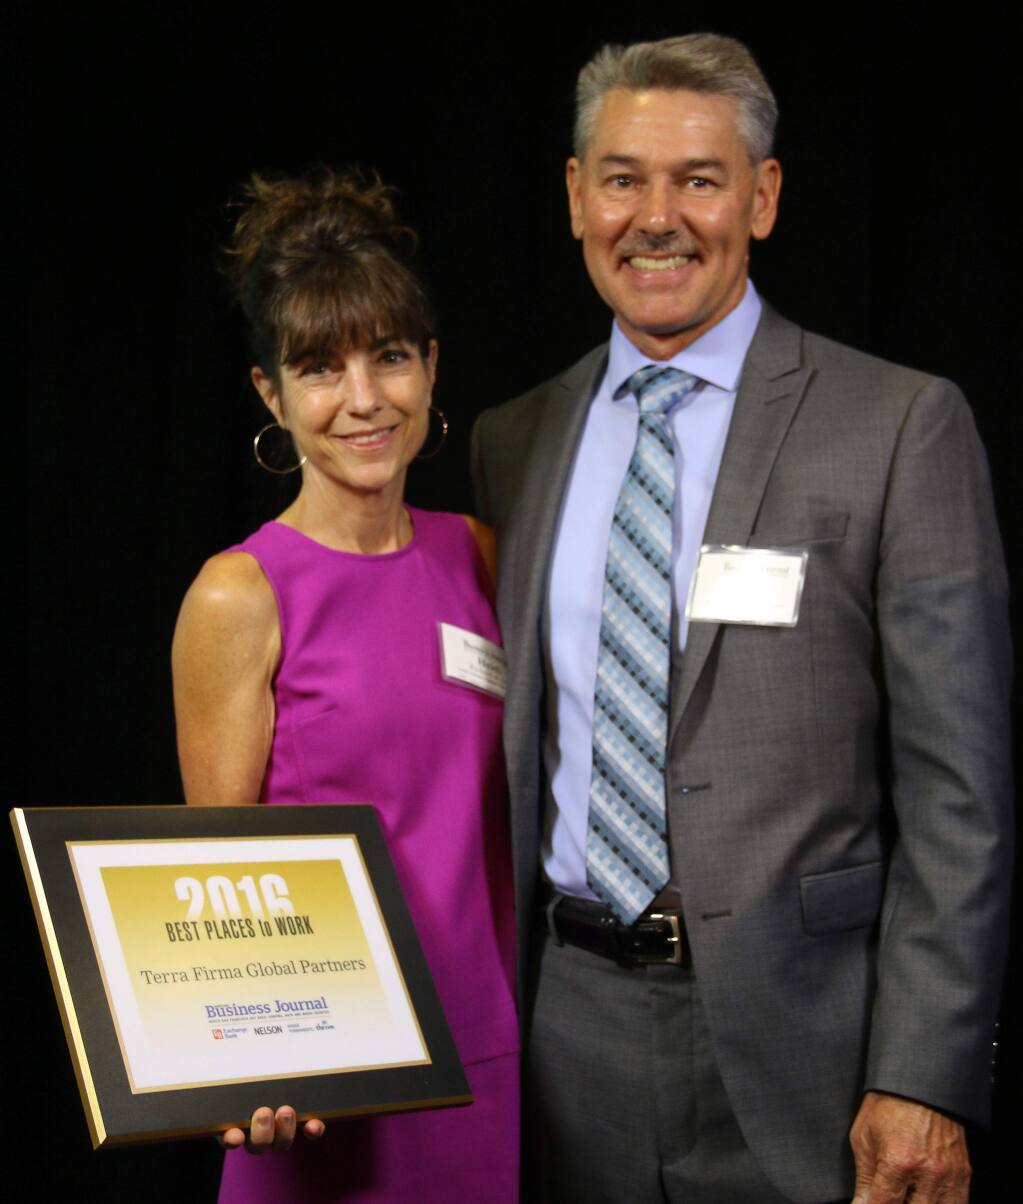 Heidi Rickerd Rizzo and Bill Facendini of Terra Firma Global Partners receives one of North Bay Business Journal's Best Places to Work awards at Hyatt Vineyard Creek Hotel & Spa on Sept. 29, 2016. (JEFF QUACKENBUSH / NORTH BAY BUSINESS JOURNAL)